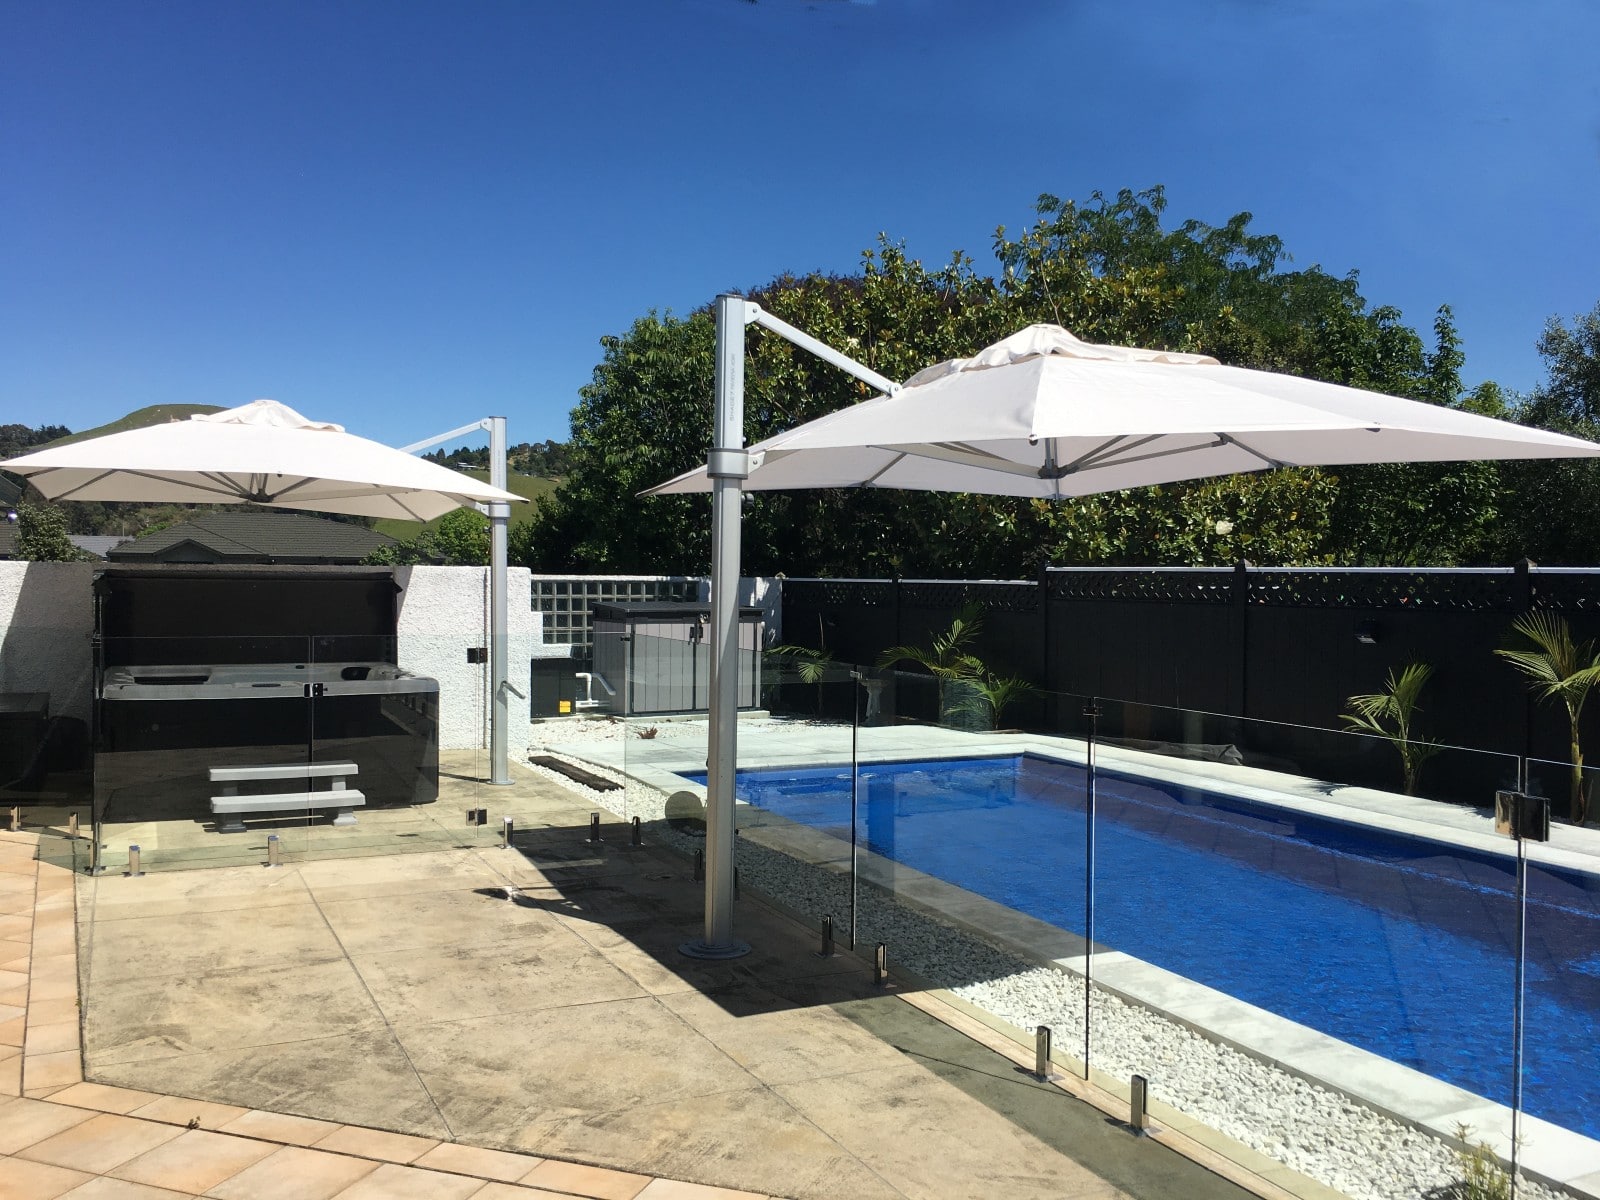 Second outdoor umbrella for poolside haven in Hawkes Bay